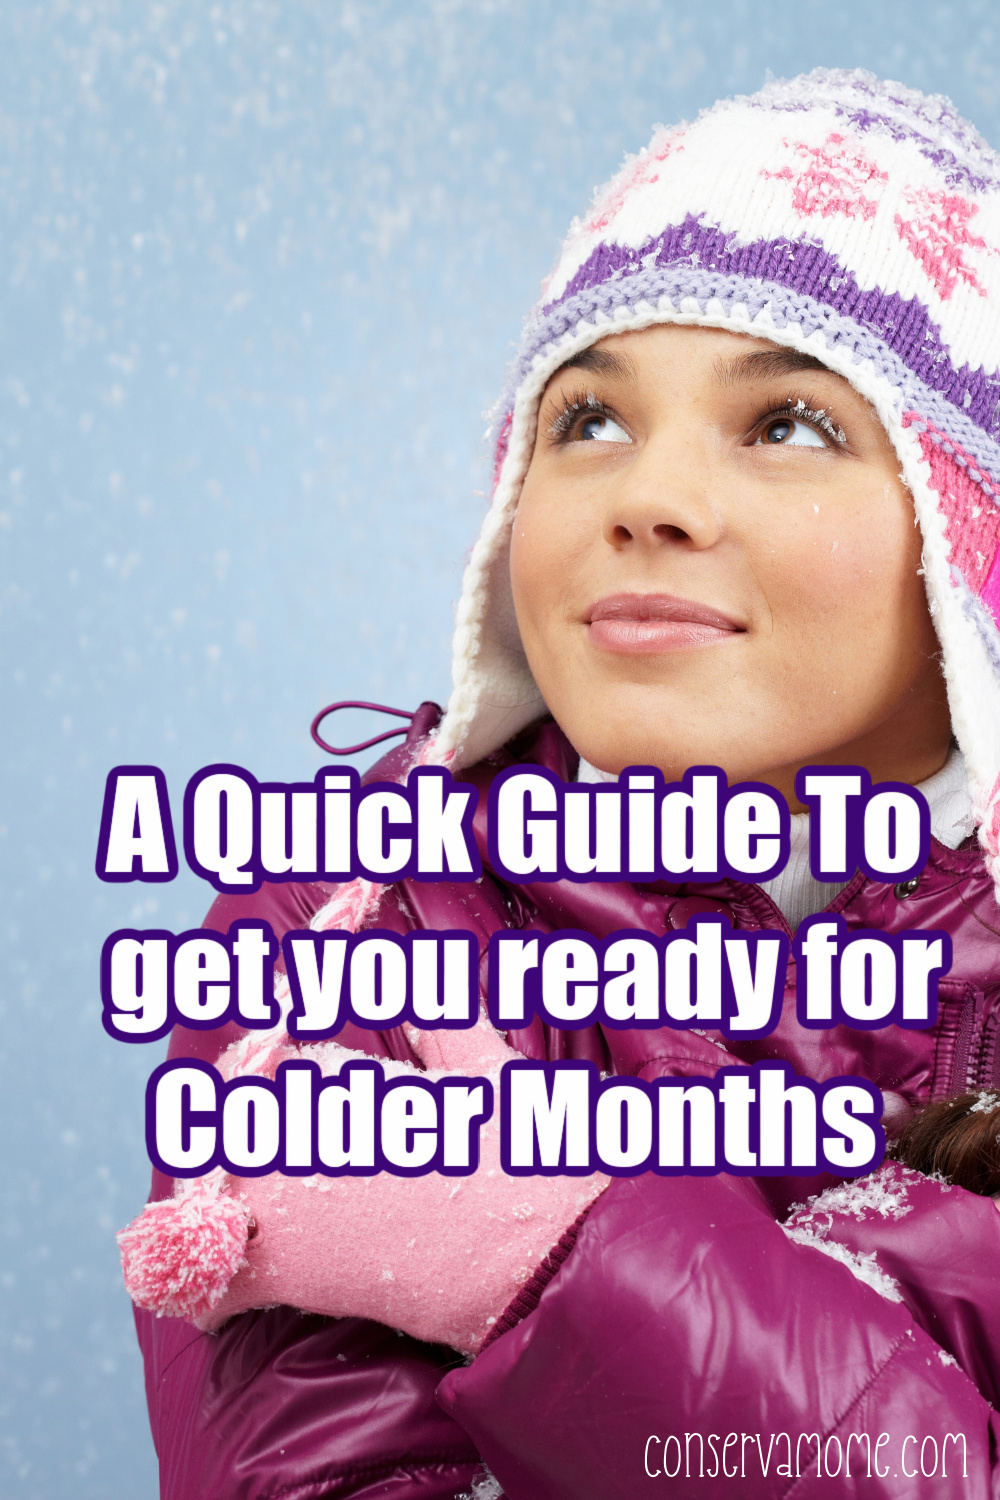 A Quick Guide To get you ready for Colder Months